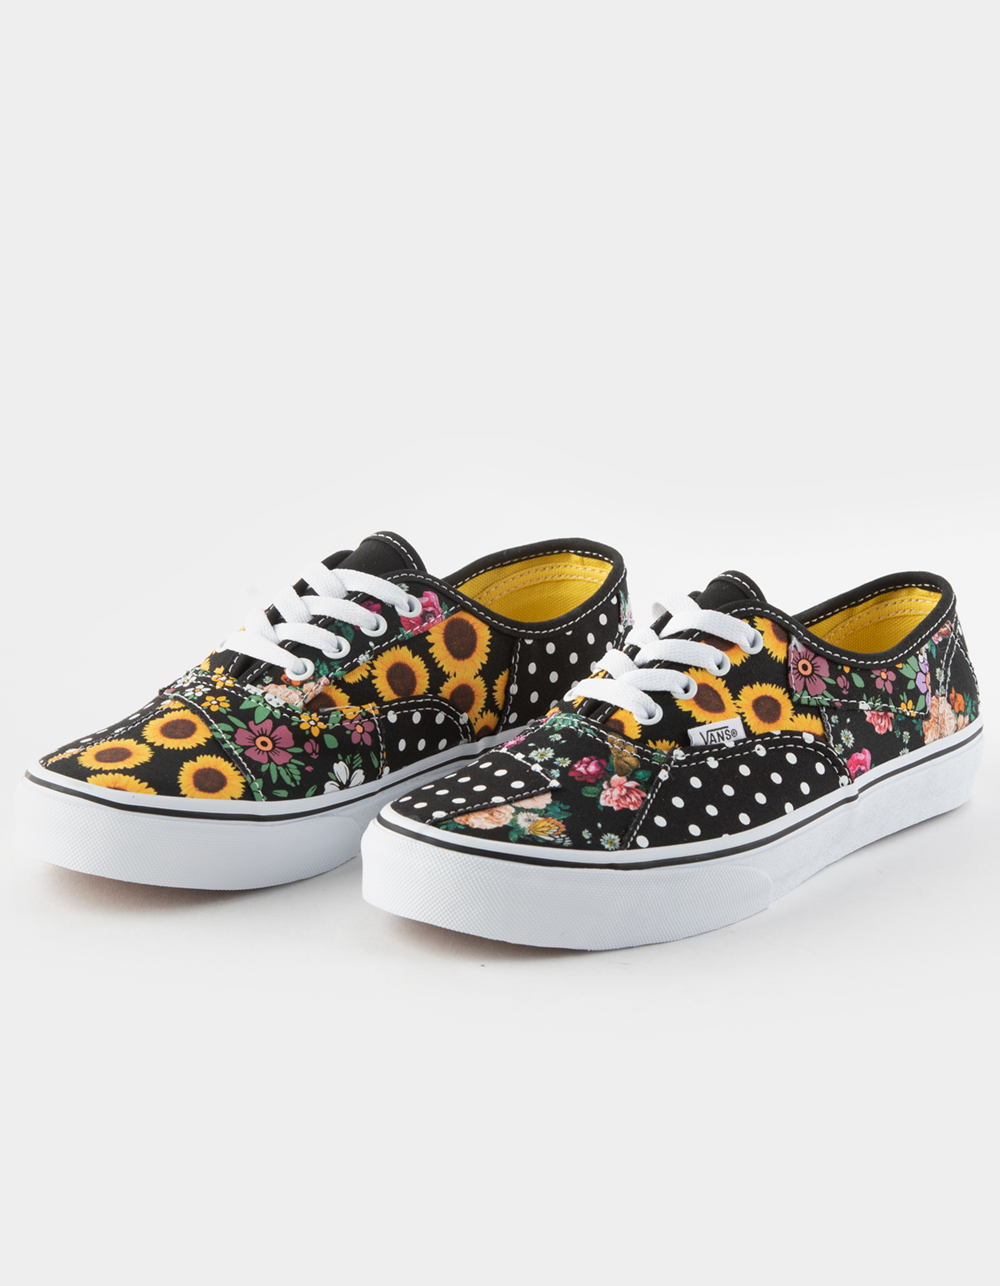 Cute Vans For Girls Cheap Selling, Save 66% 